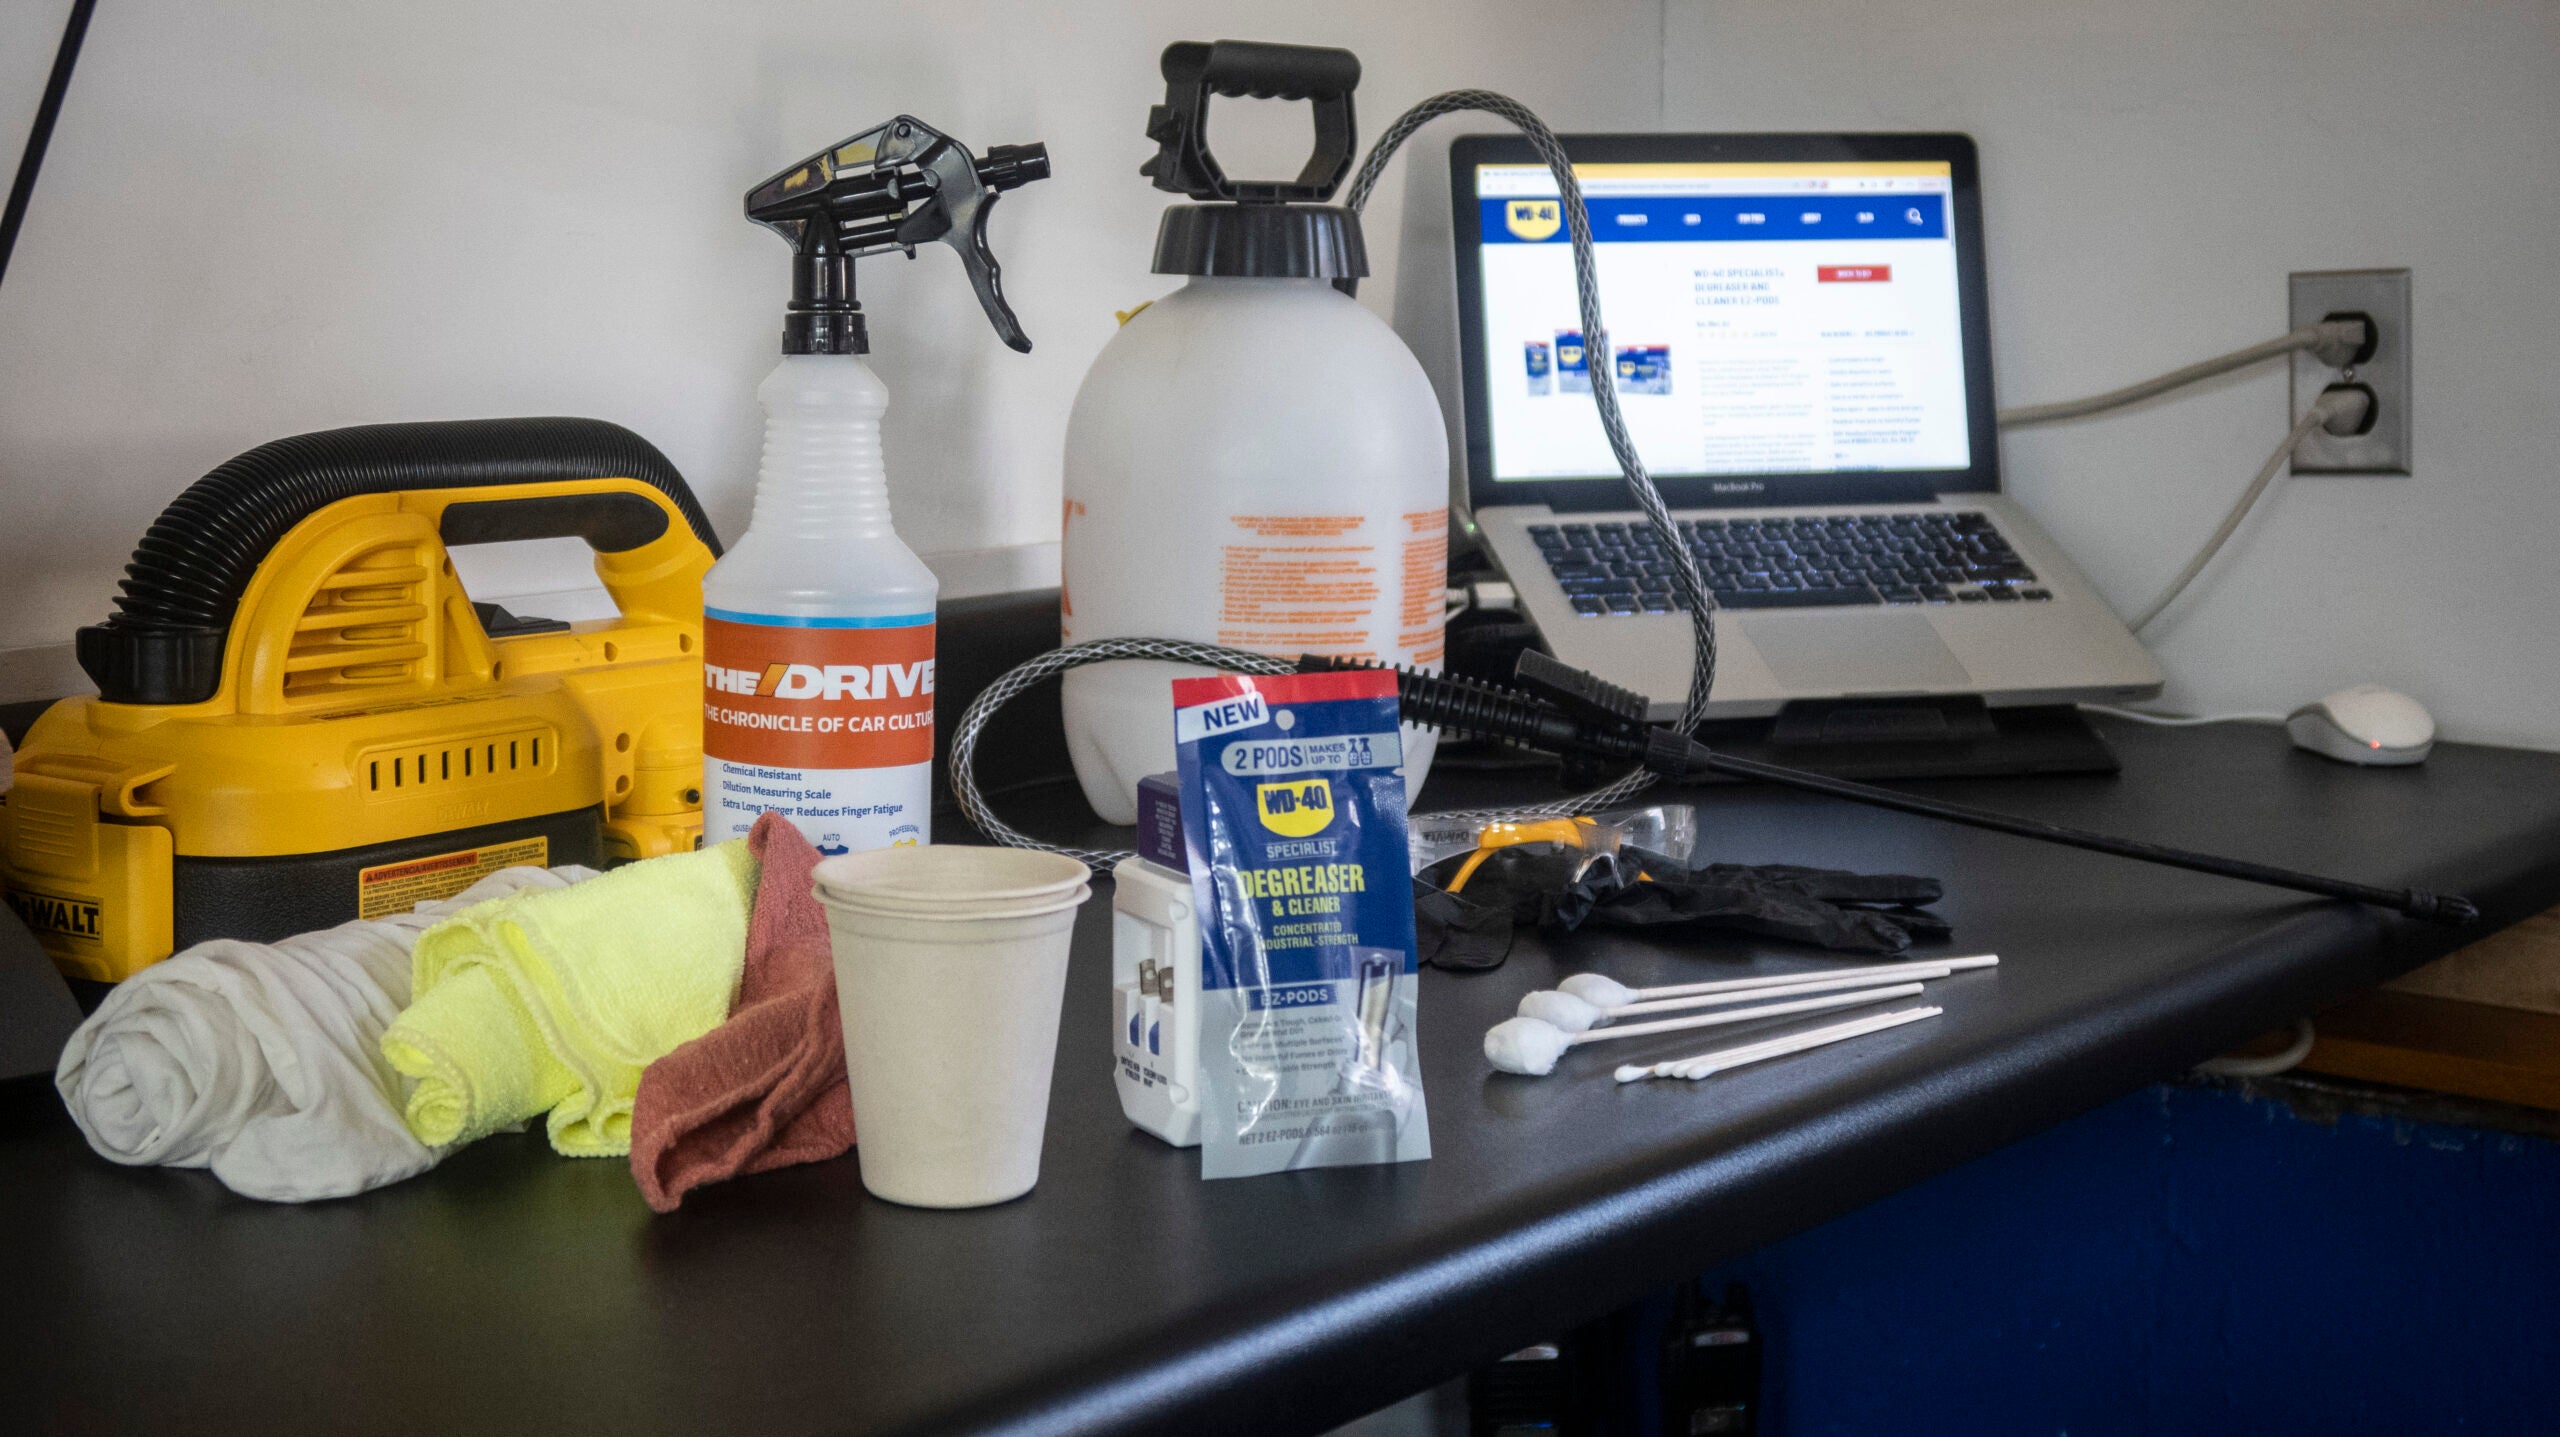 WD-40 Specialist Degreaser and Cleaner EZ-Pods